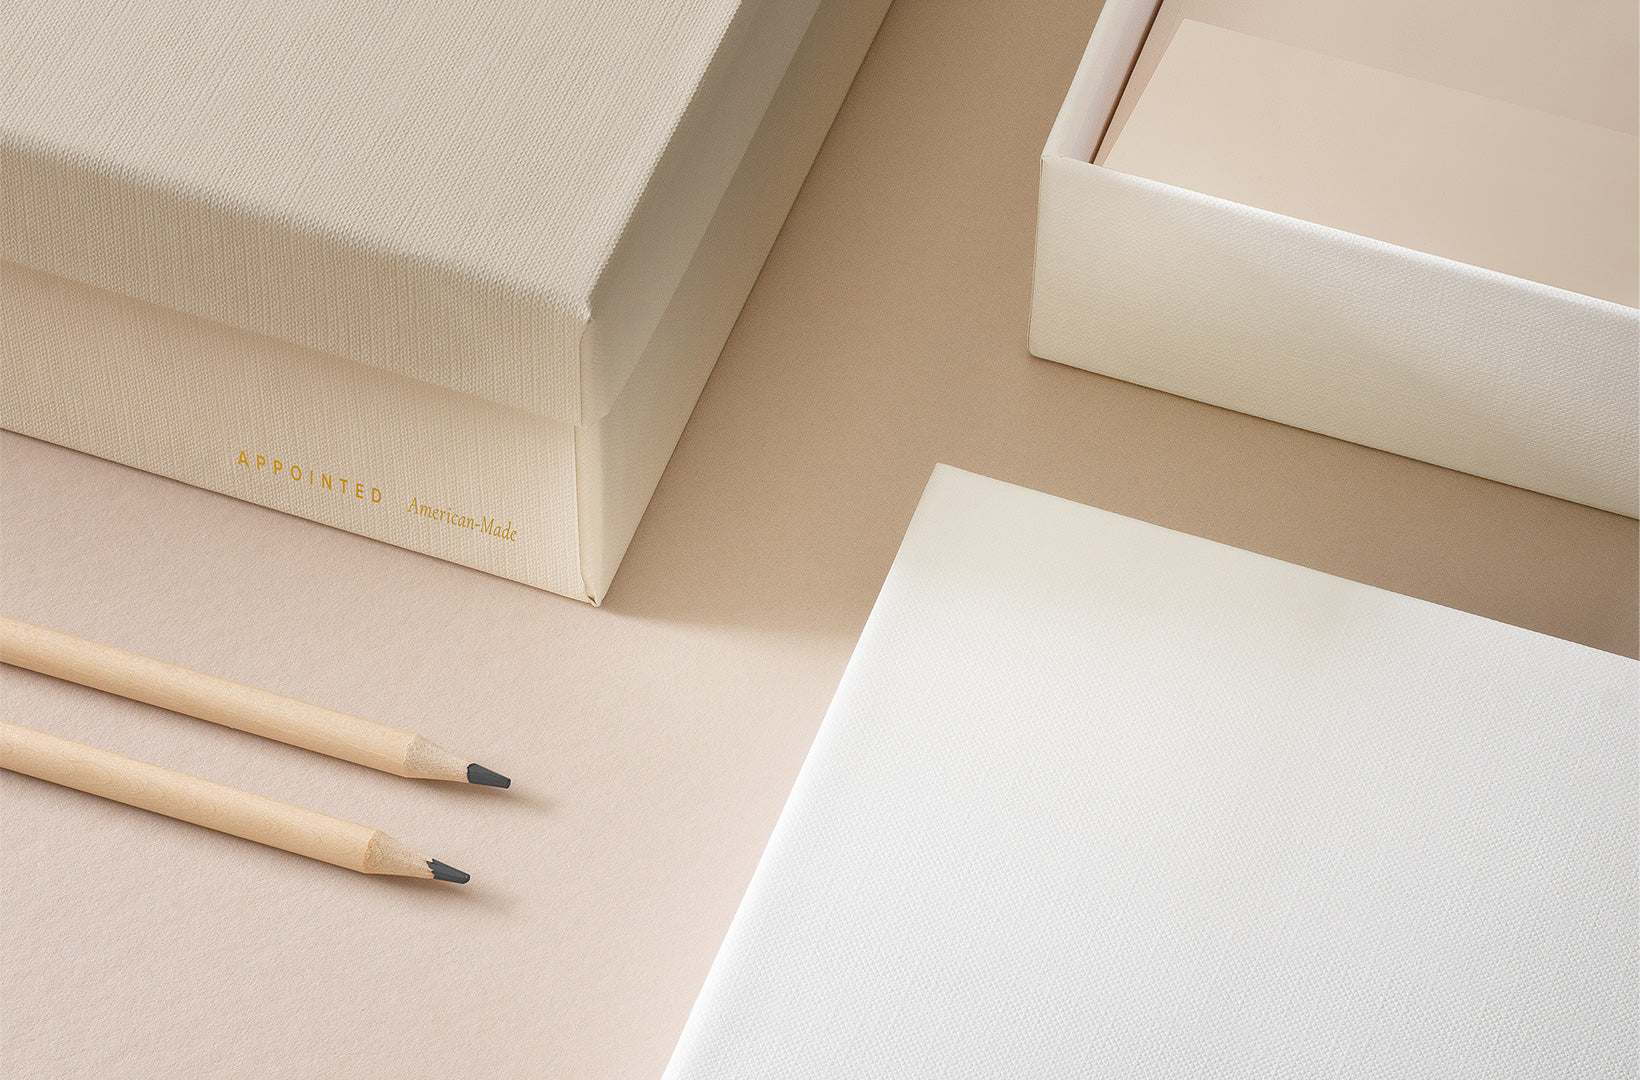 the appointed storage box set is open on a light beige background with pencils aside.